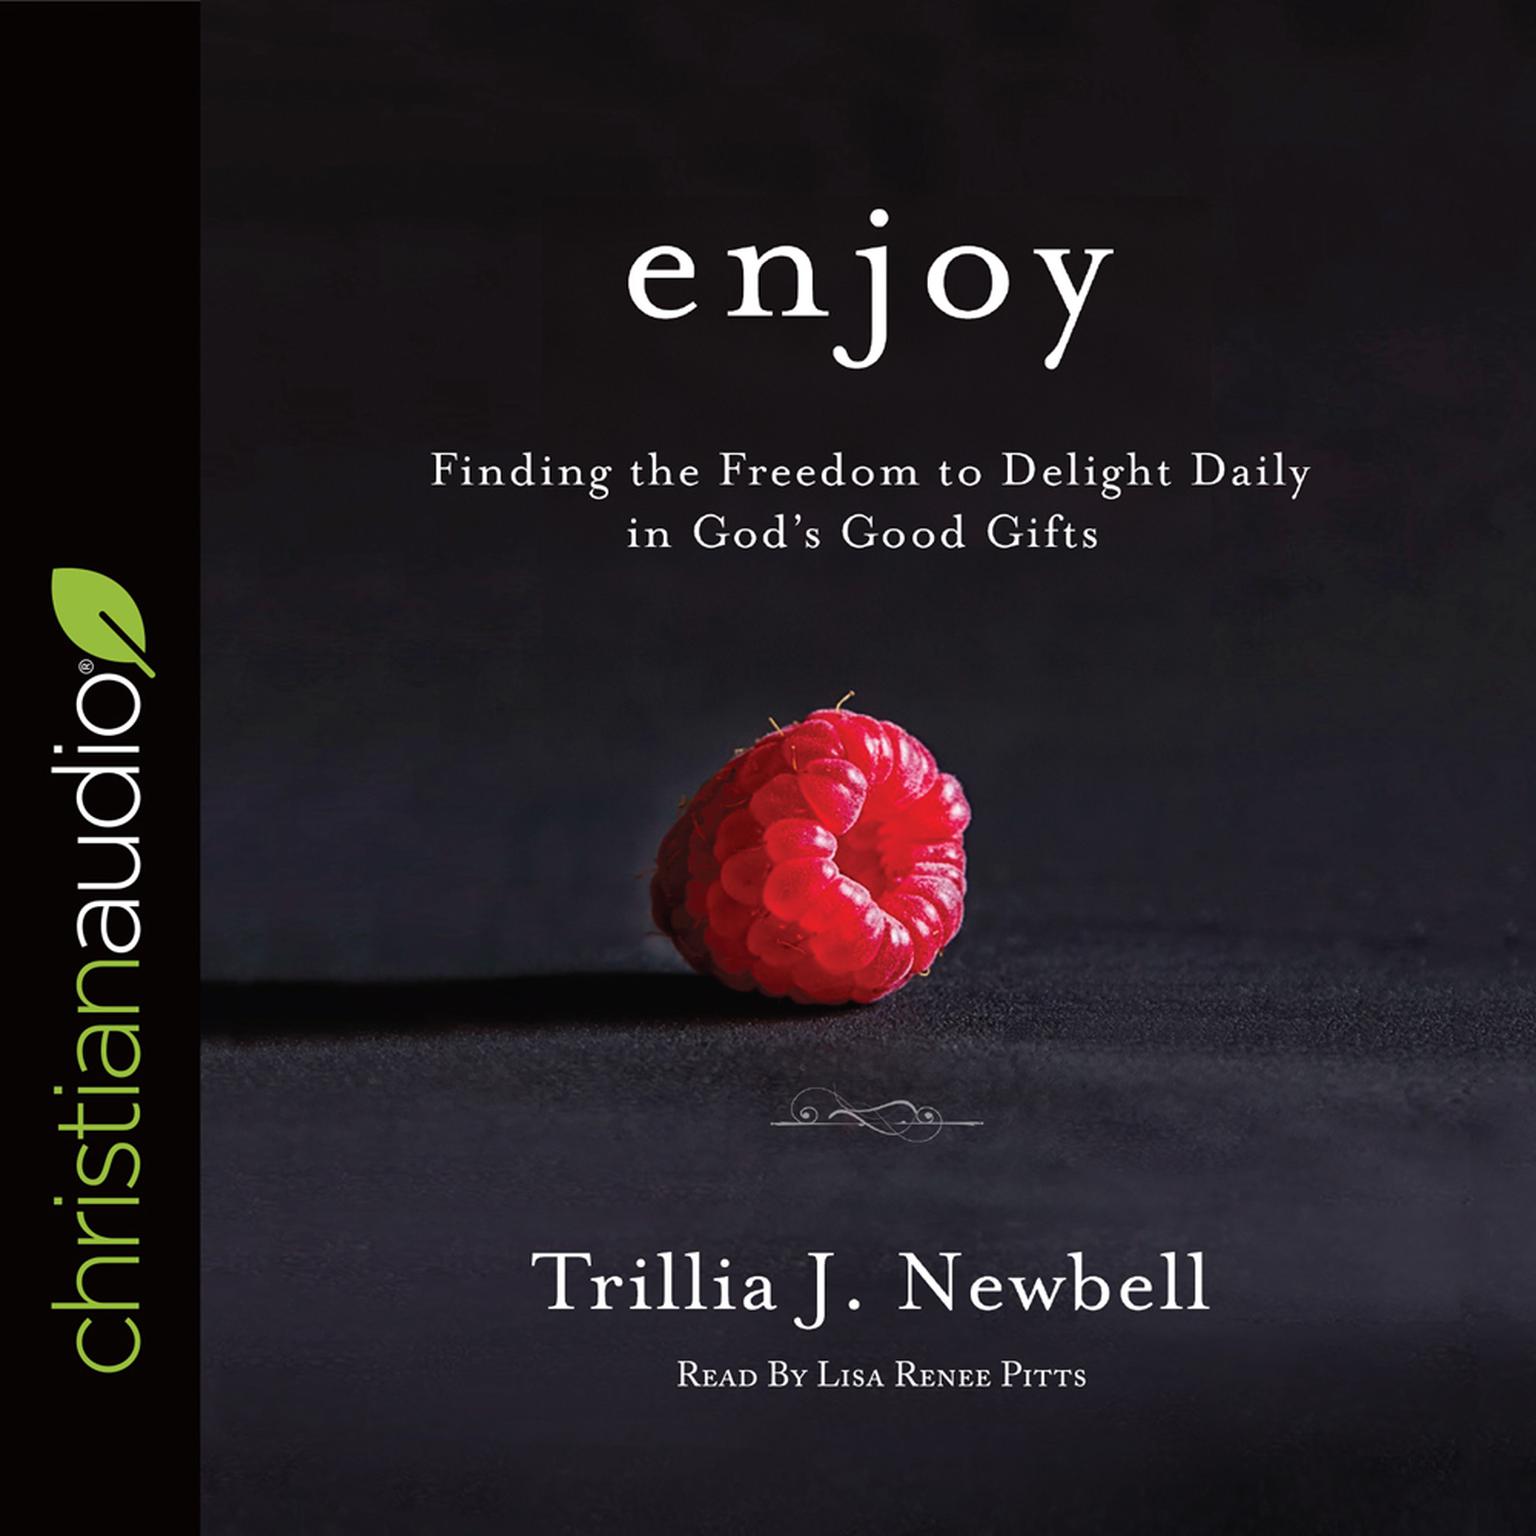 Enjoy: Finding the Freedom to Delight Daily in Gods Good Gifts Audiobook, by Trillia J. Newbell